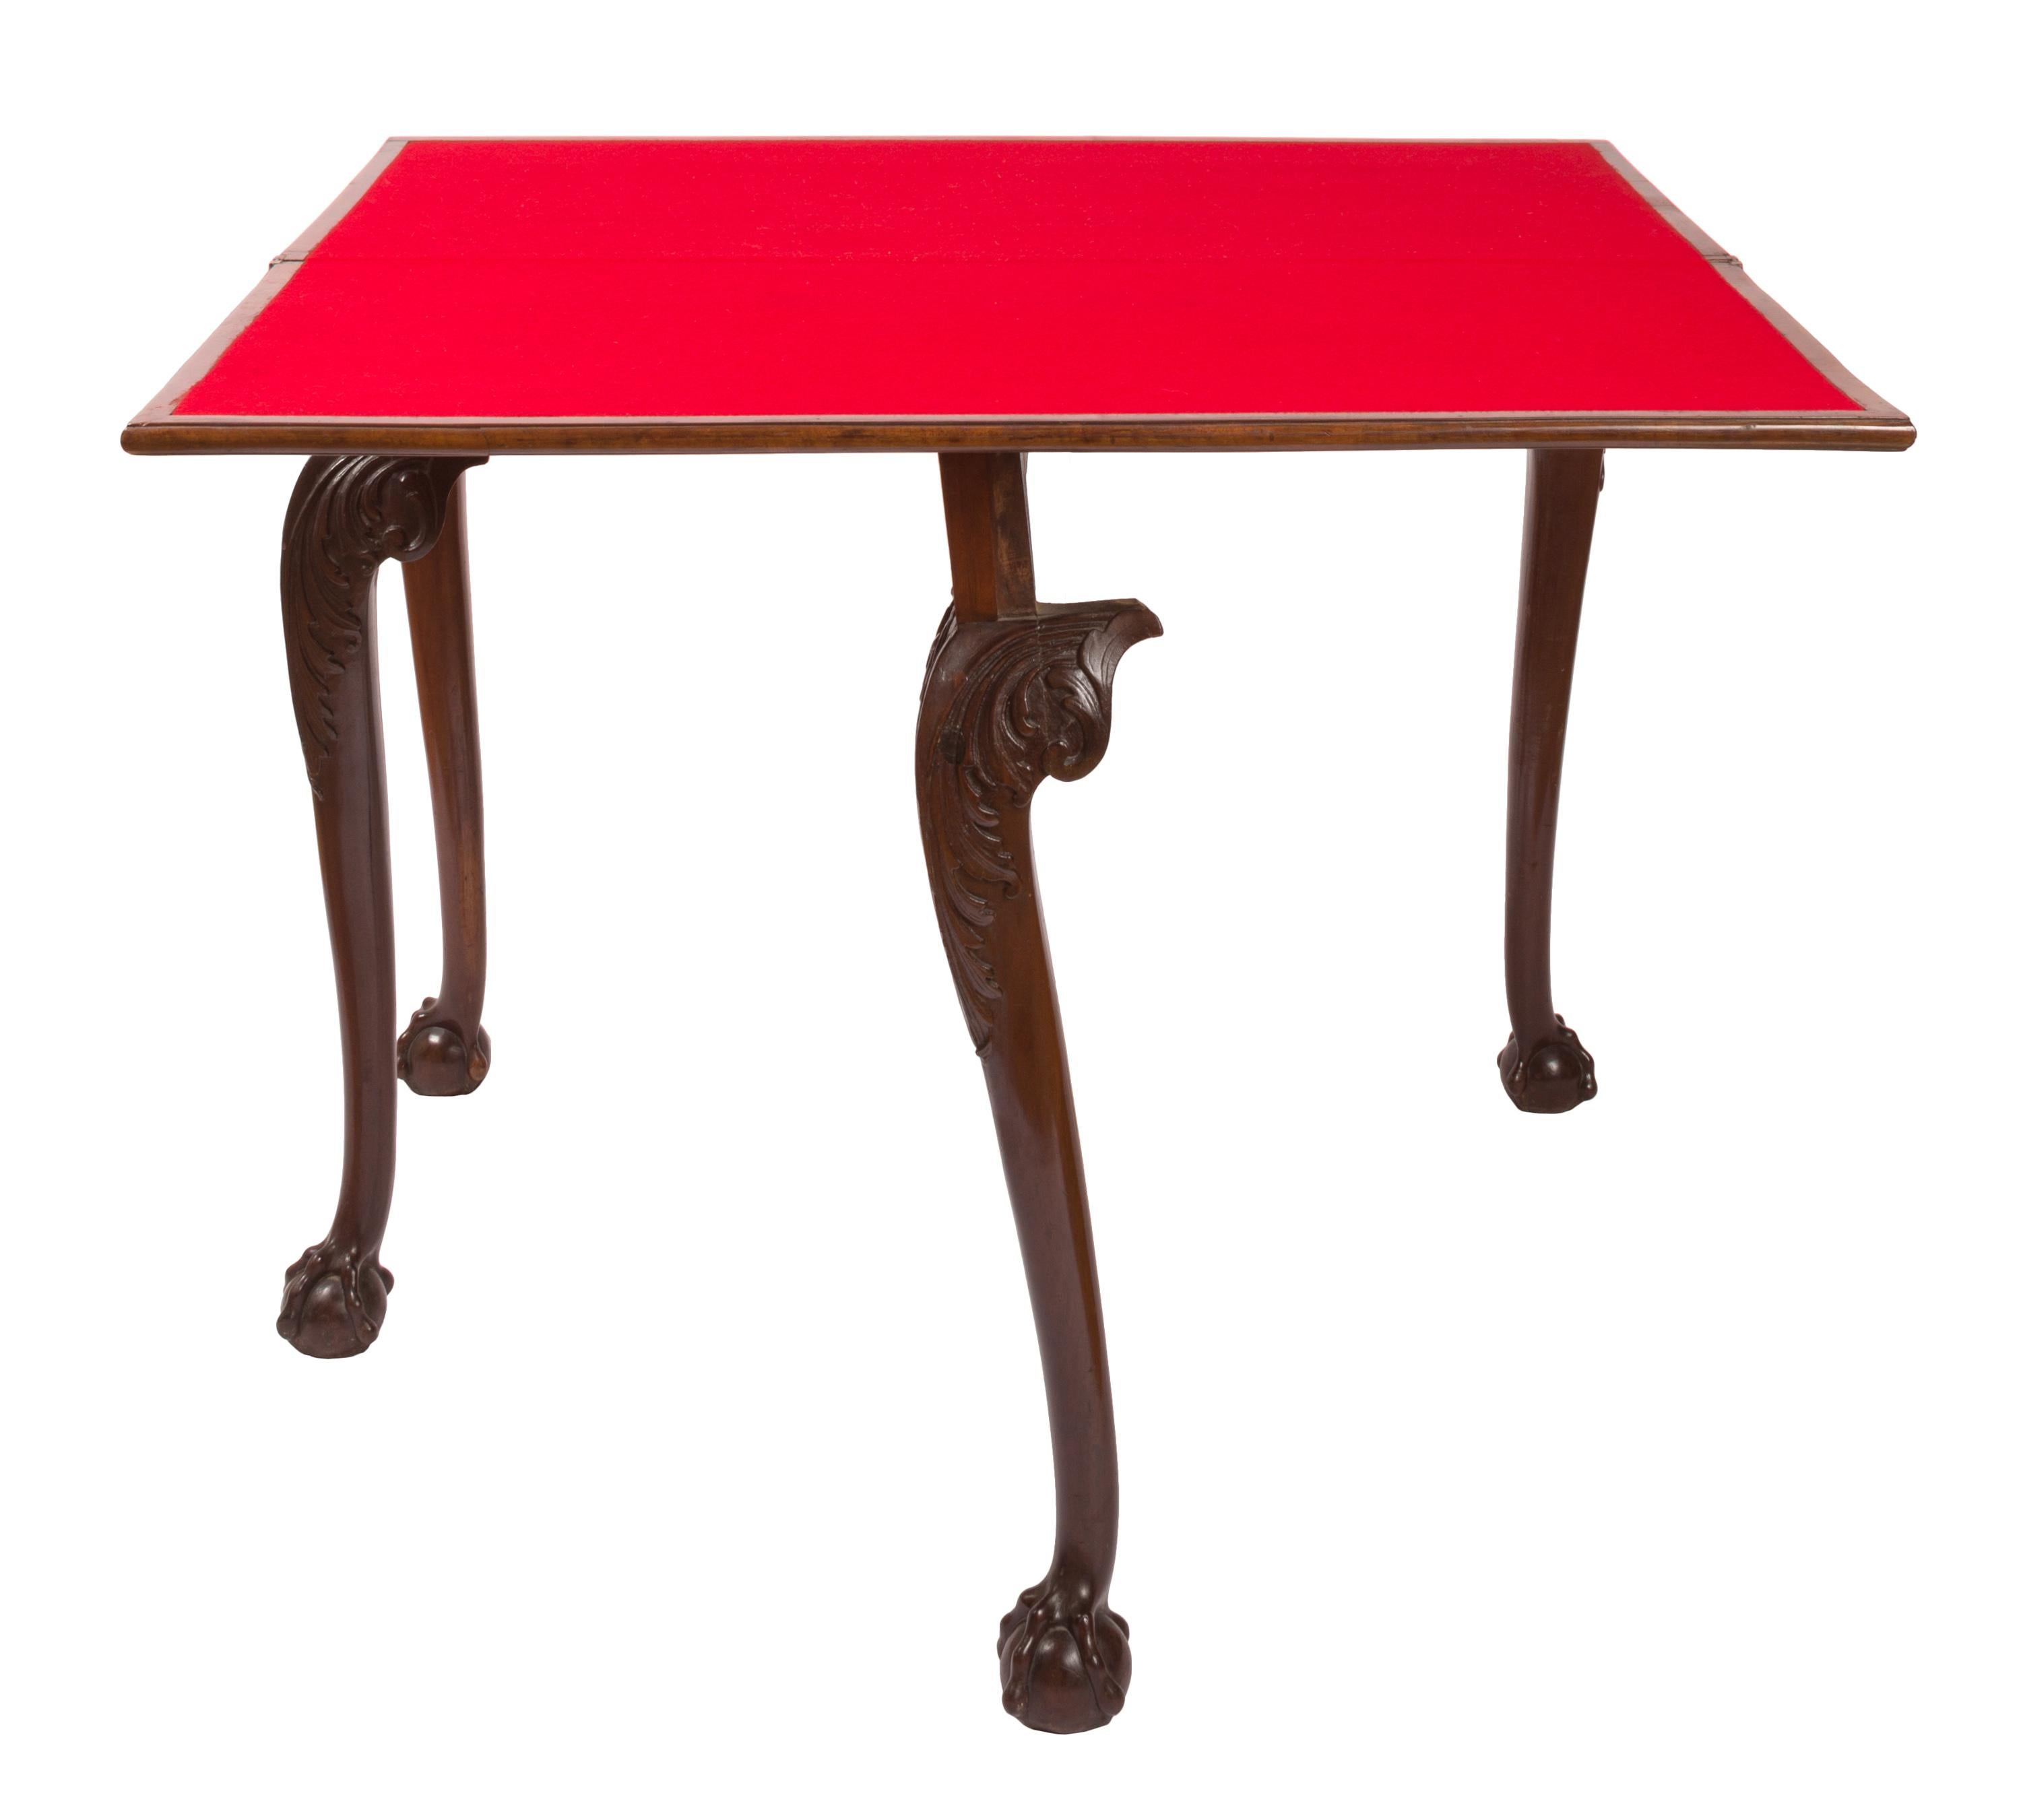 A 19th century Chippendale style swivel fold-over card table that cleverly transforms from a narrow side table into a square, red felt-covered gaming surface. The slender and elegant cabriole legs are decorated with carved acanthus type leaves at